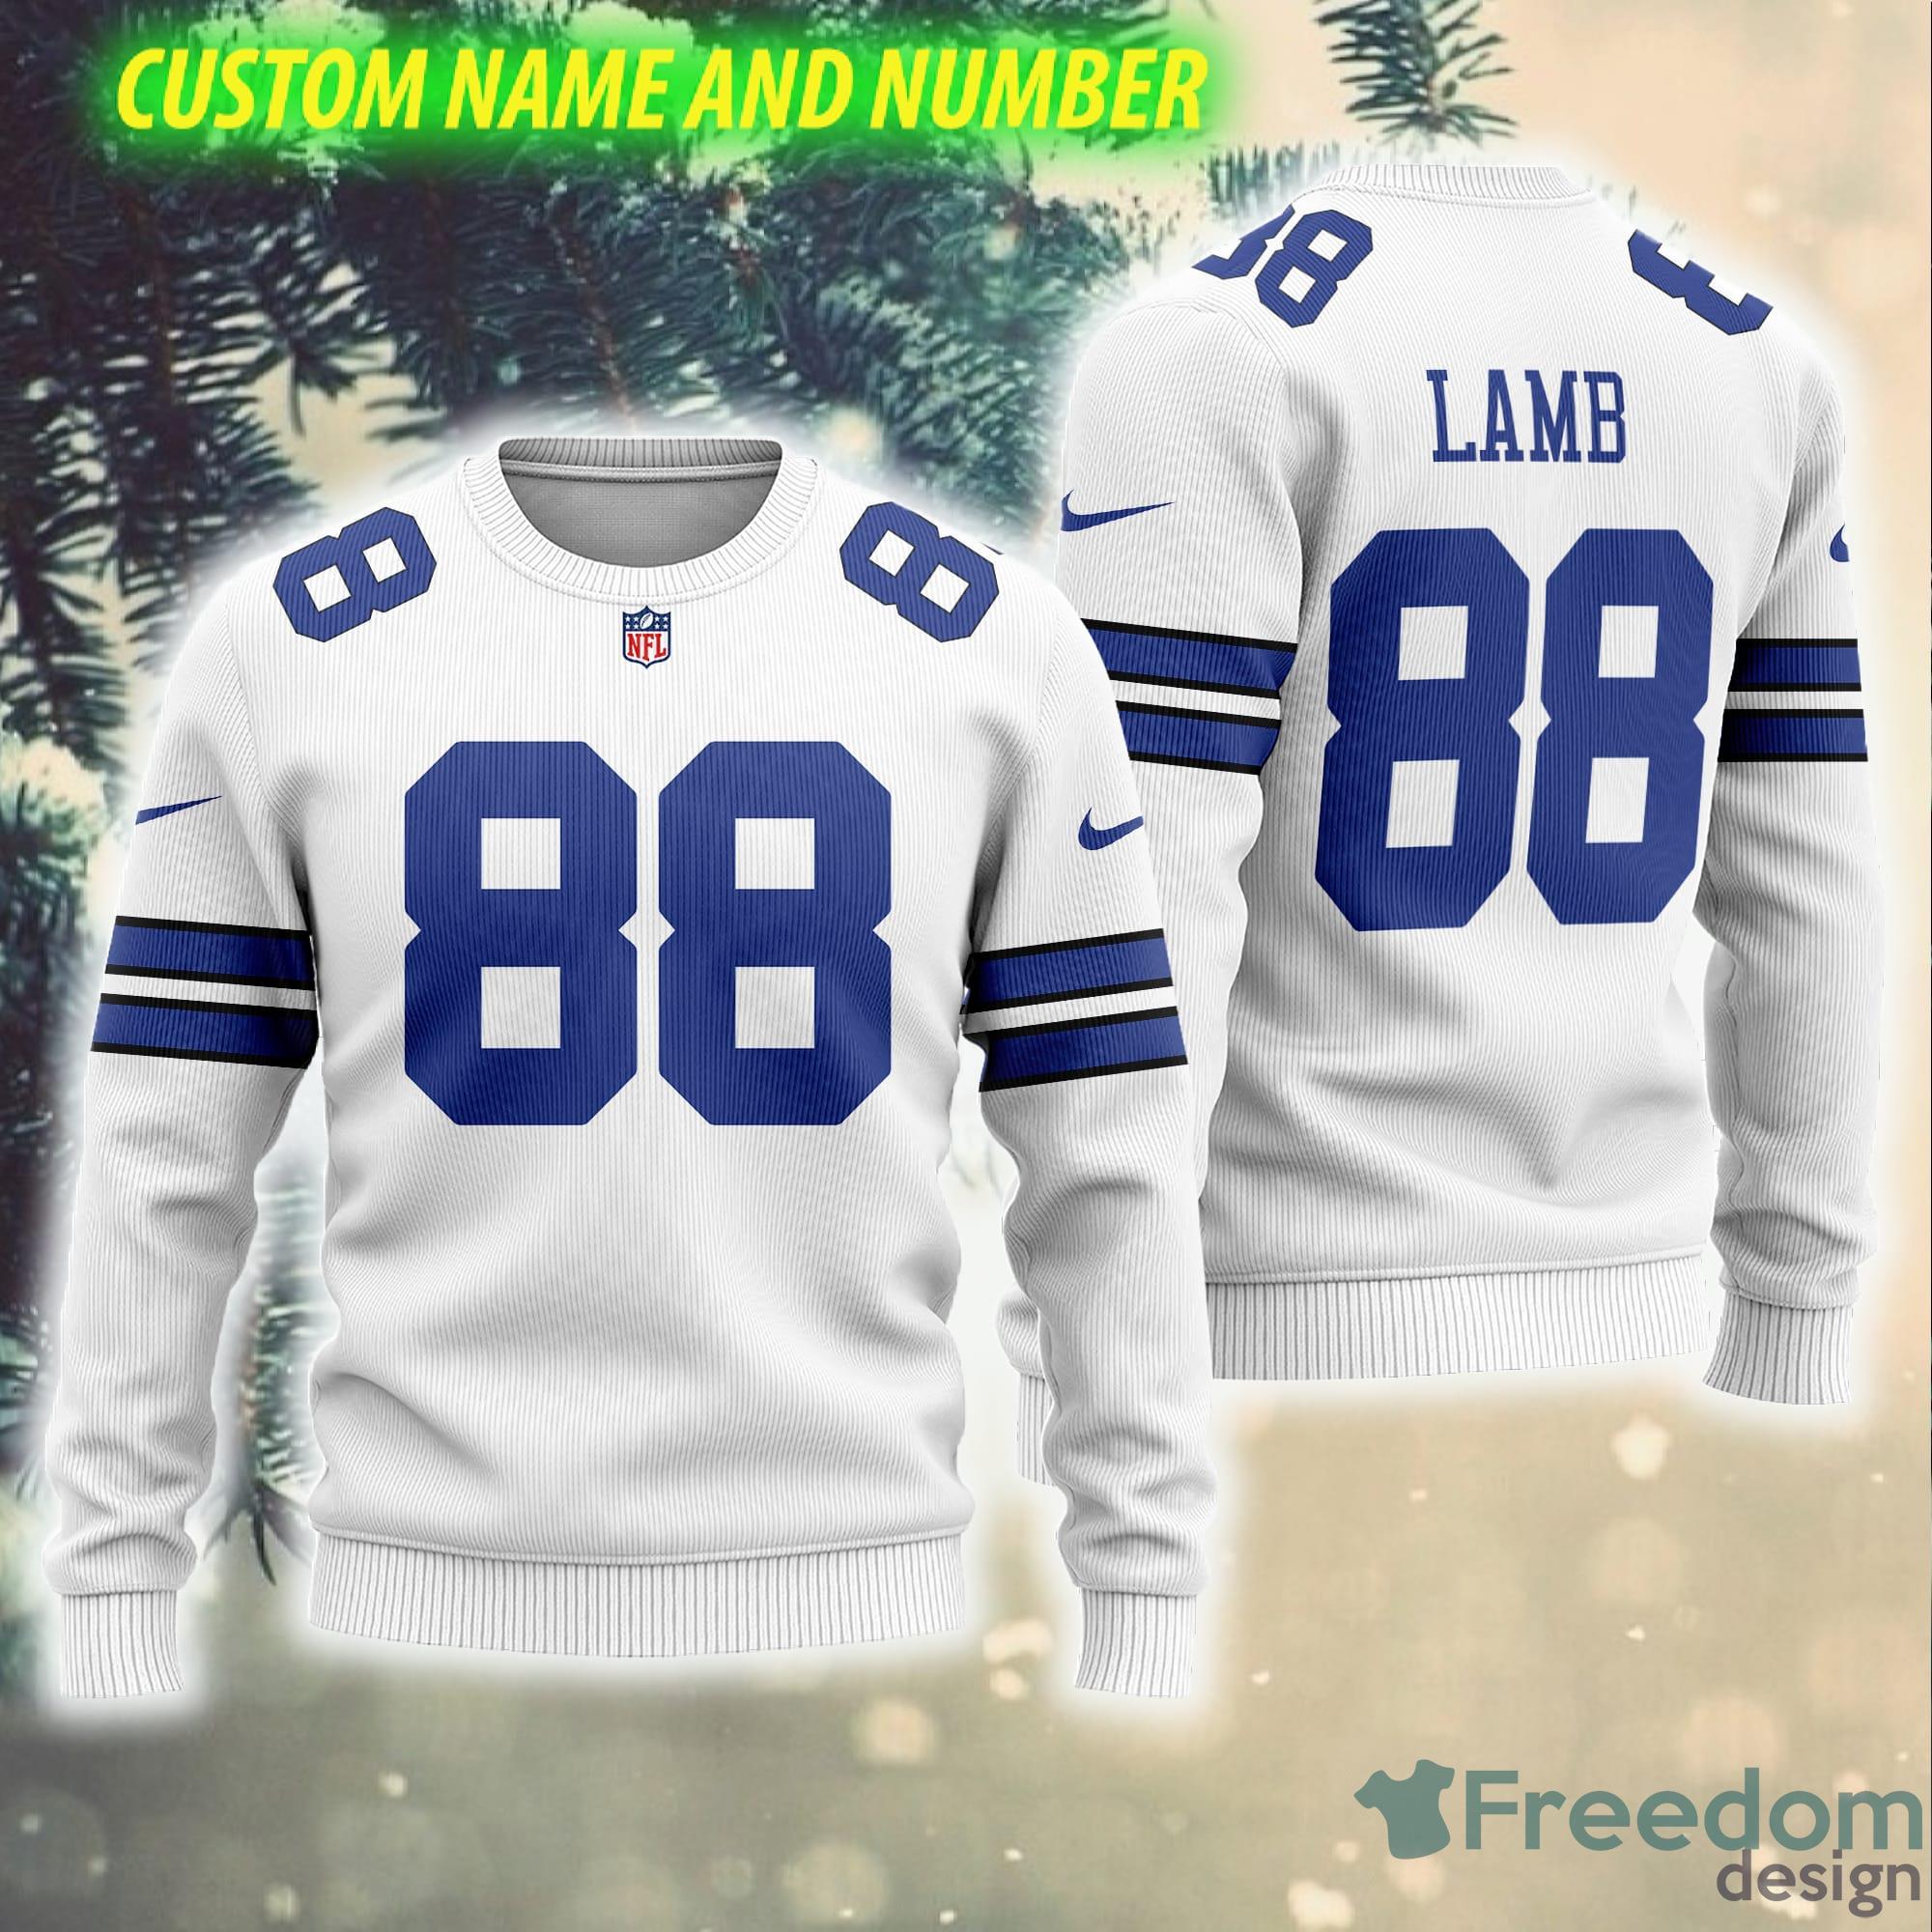 Custom Number And Name CeeDee Lamb 88 Dallas Cowboys NFL 3D Hug Ugly  Christmas Sweater White Gift For Fans - Freedomdesign